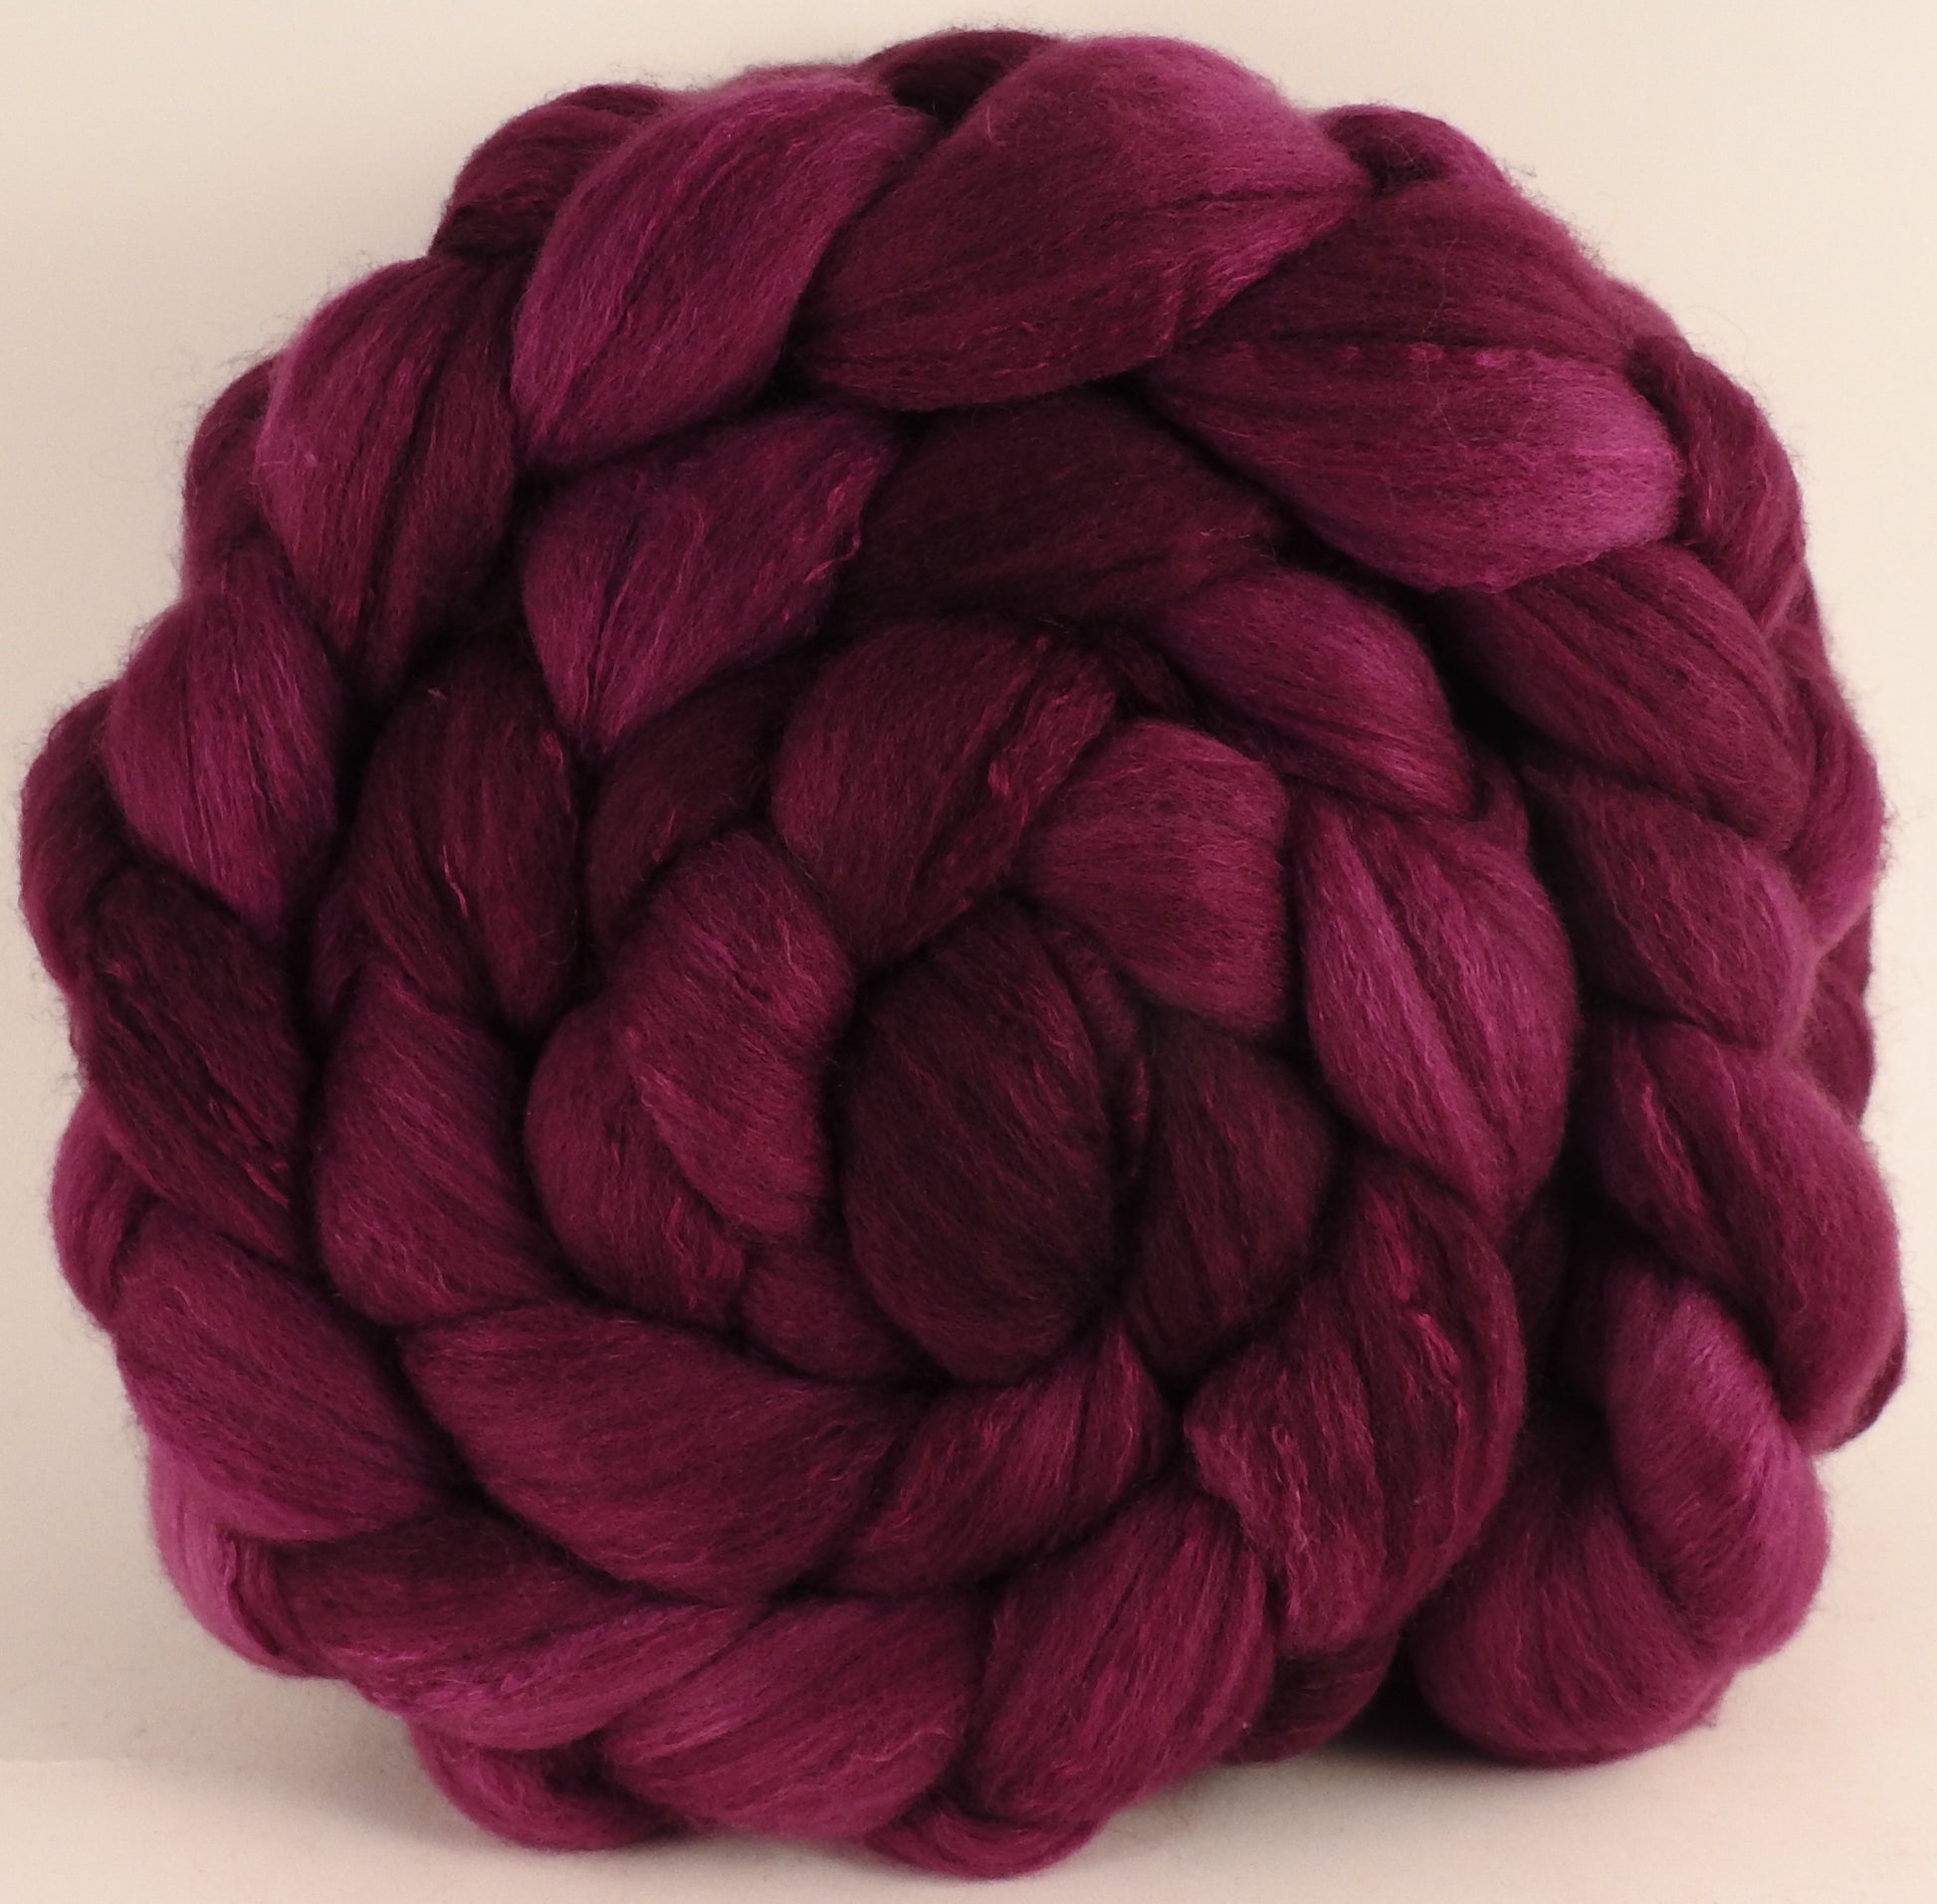 Hand dyed top for spinning - Mulberry - Organic Polwarth / Tussah silk (80/20) - Inglenook Fibers